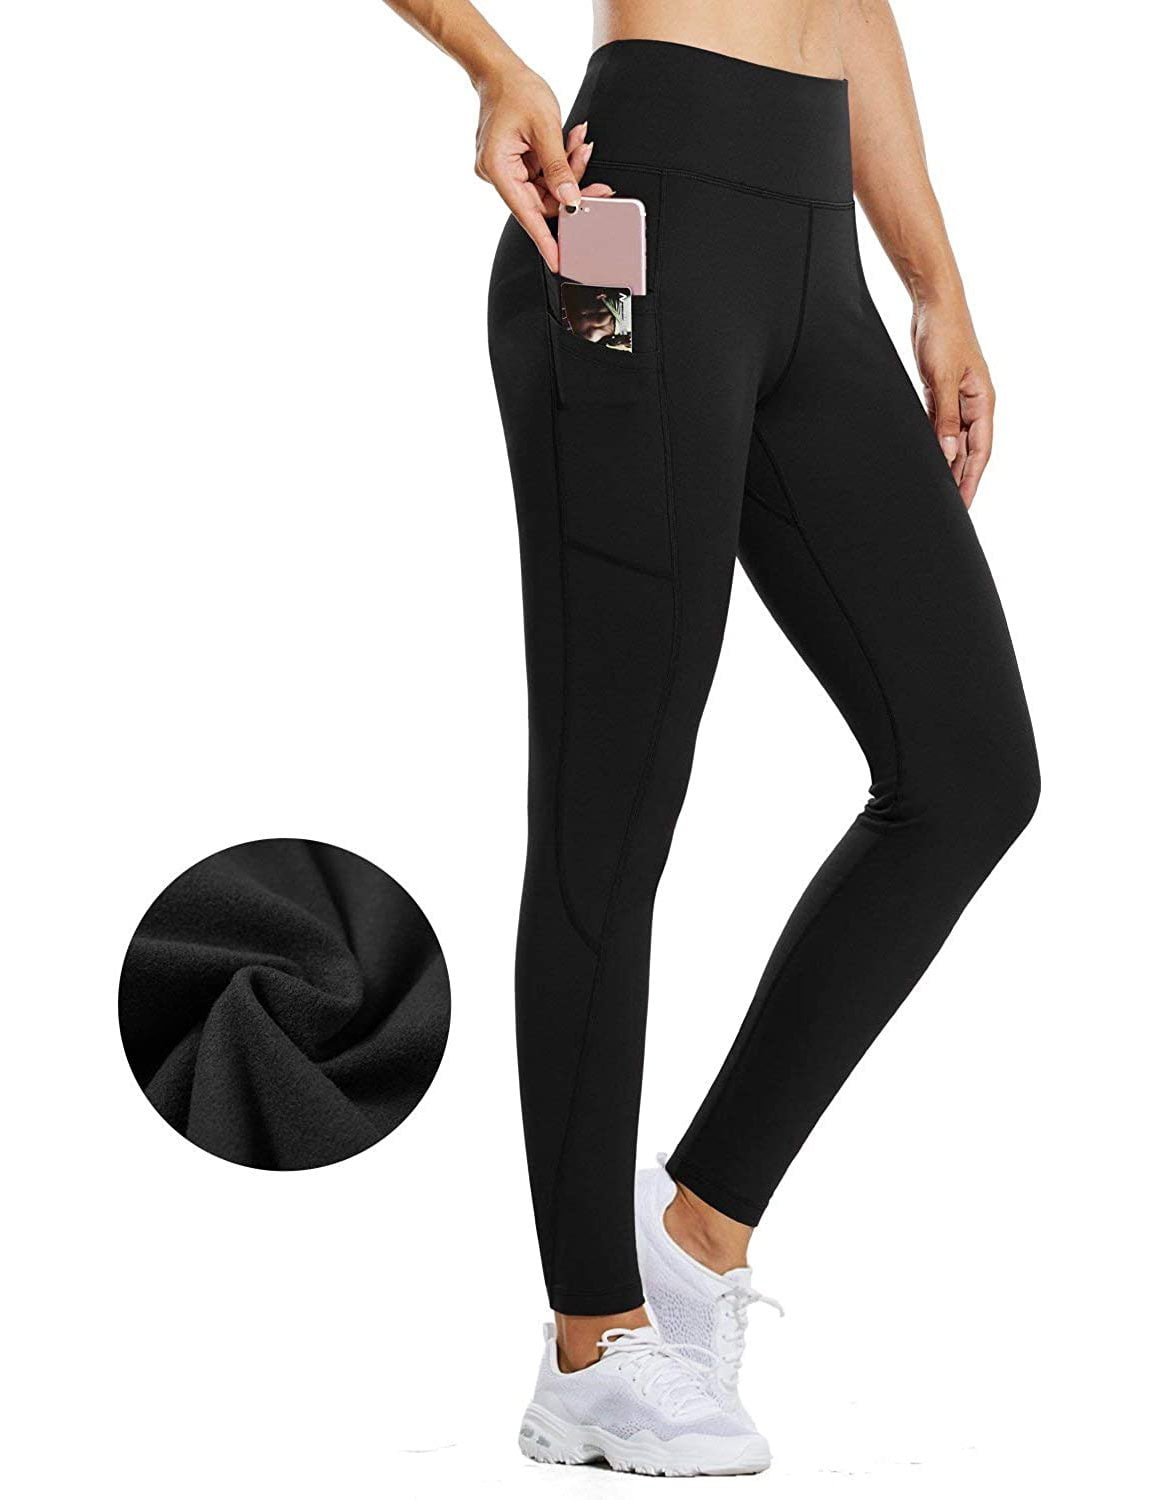 BALEAF Womens High Waisted Running Tights Hiking Legging with Pocket Capris Workout Training 